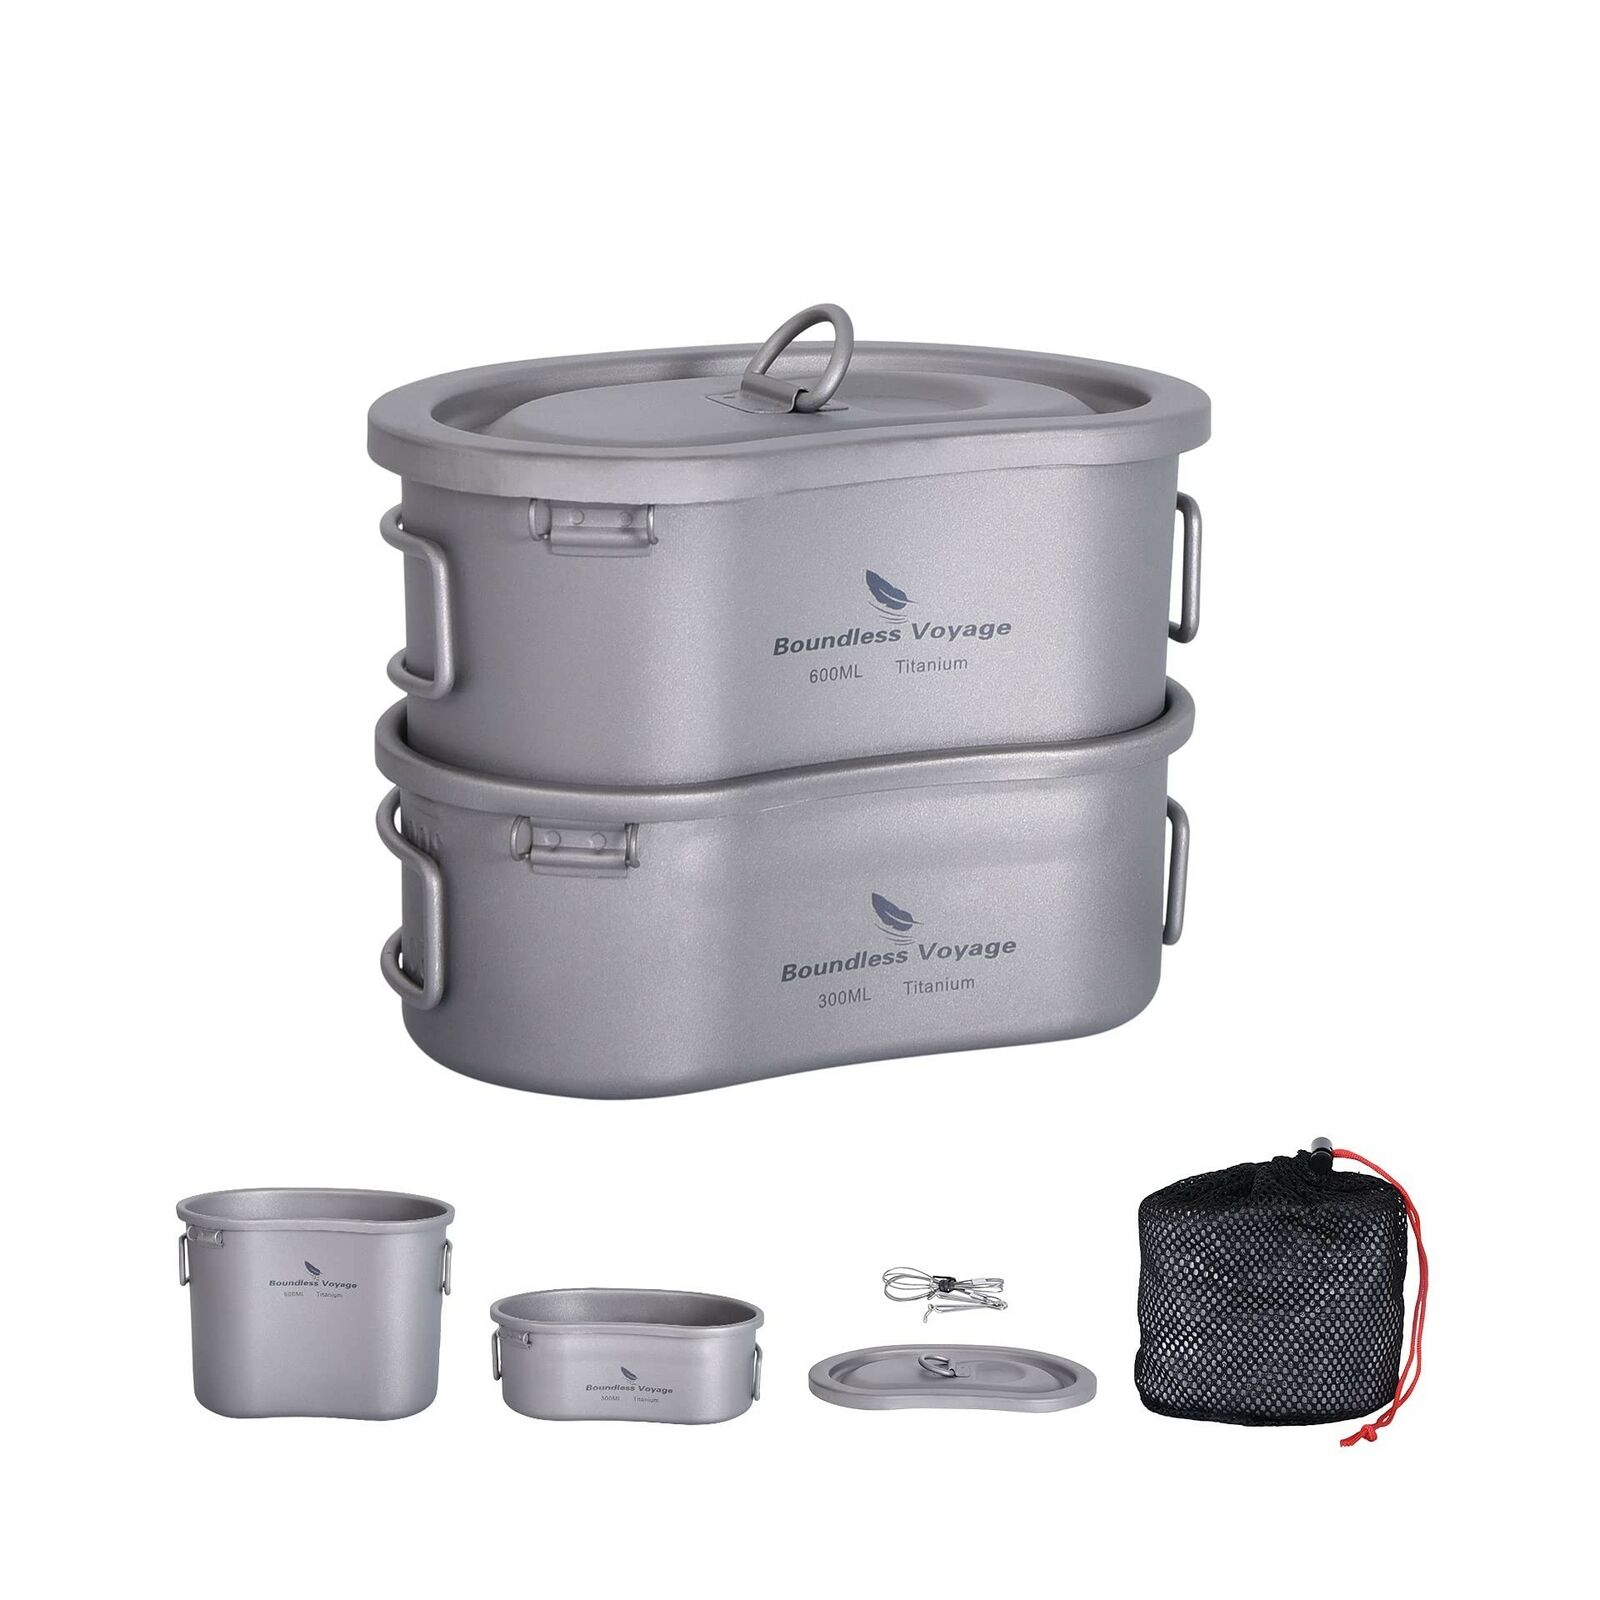 Boundless Voyage Titanium Very popular Canteen Mess Kit and with Lid Cheap super special price Folding